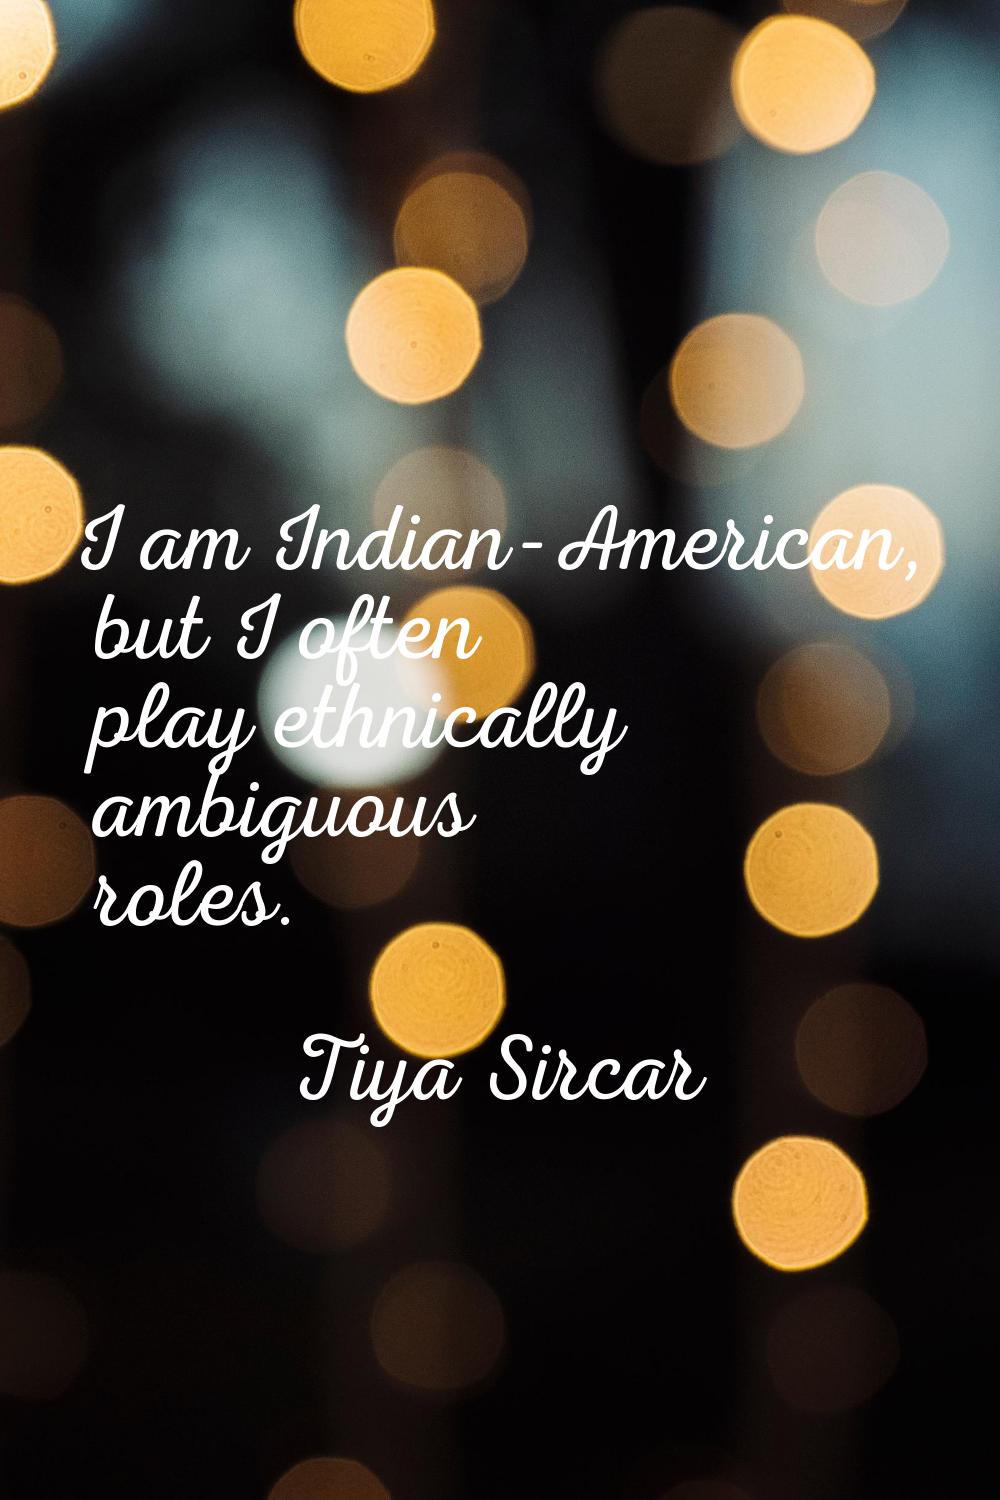 I am Indian-American, but I often play ethnically ambiguous roles.